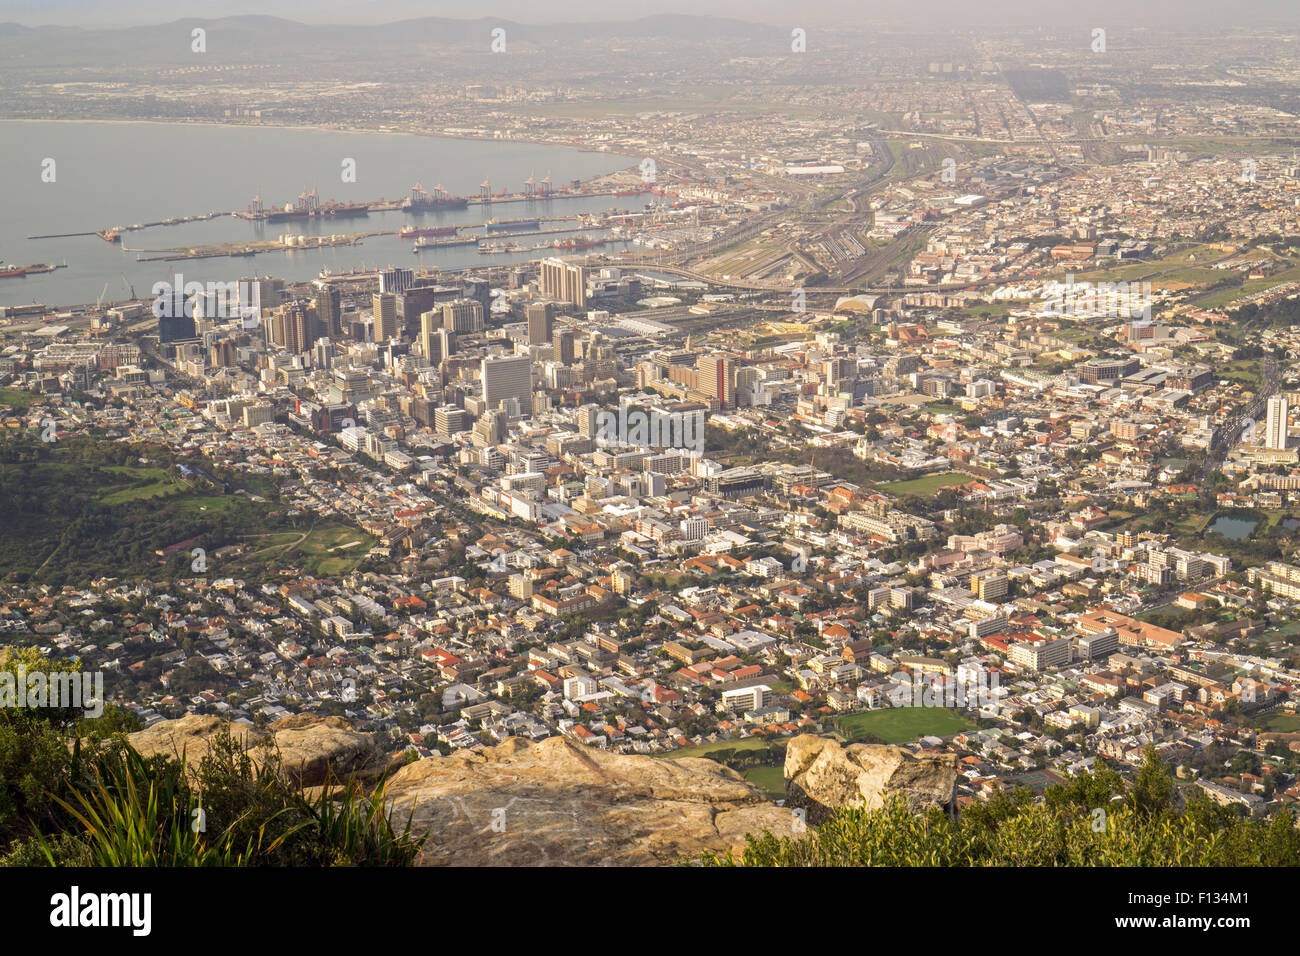 A view of Cape Town's CBD from the top of Lion's Head - 11/08/2015 Stock Photo